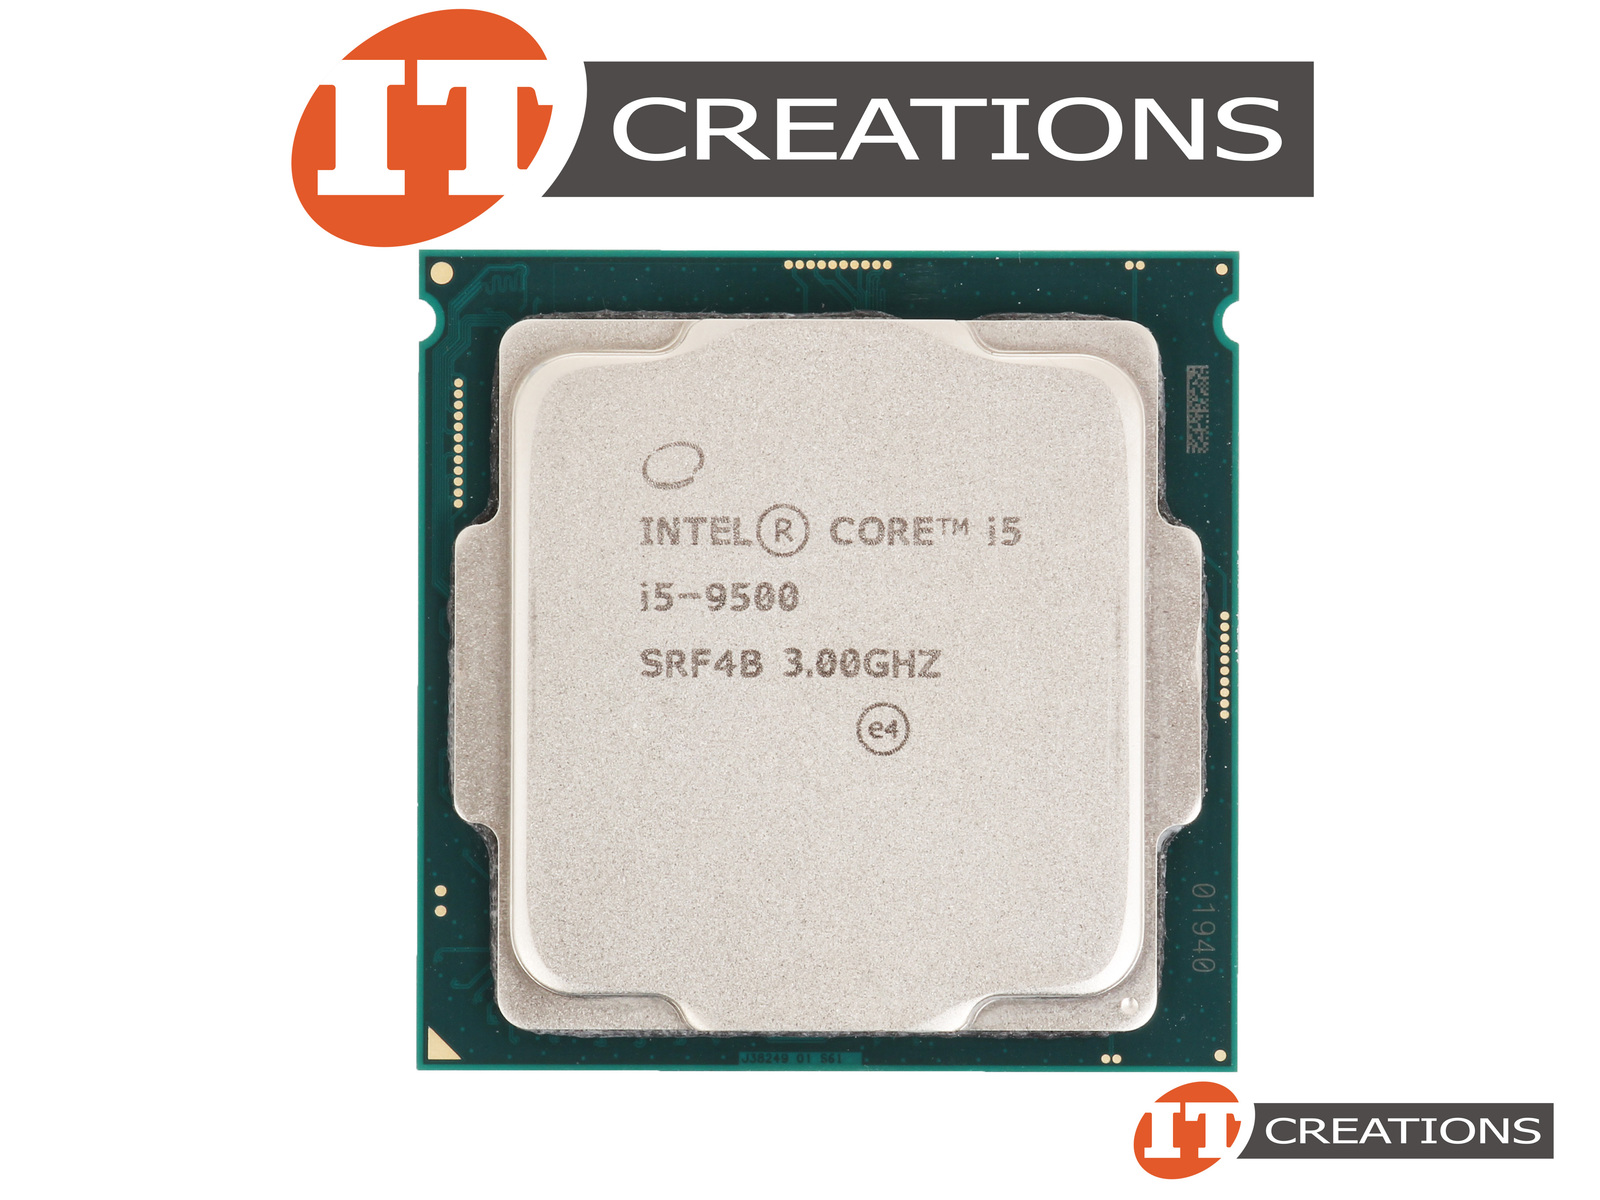 INTEL CORE 6 CORE PROCESSOR I5-9500 3.00GHZ BASE / 4.40GHZ MAX 9MB SMART  CACHE 8 GT/S BUS SPEED TDP 65W FCLGA1151 ( COFFEE LAKE ) (CM8068403362610)